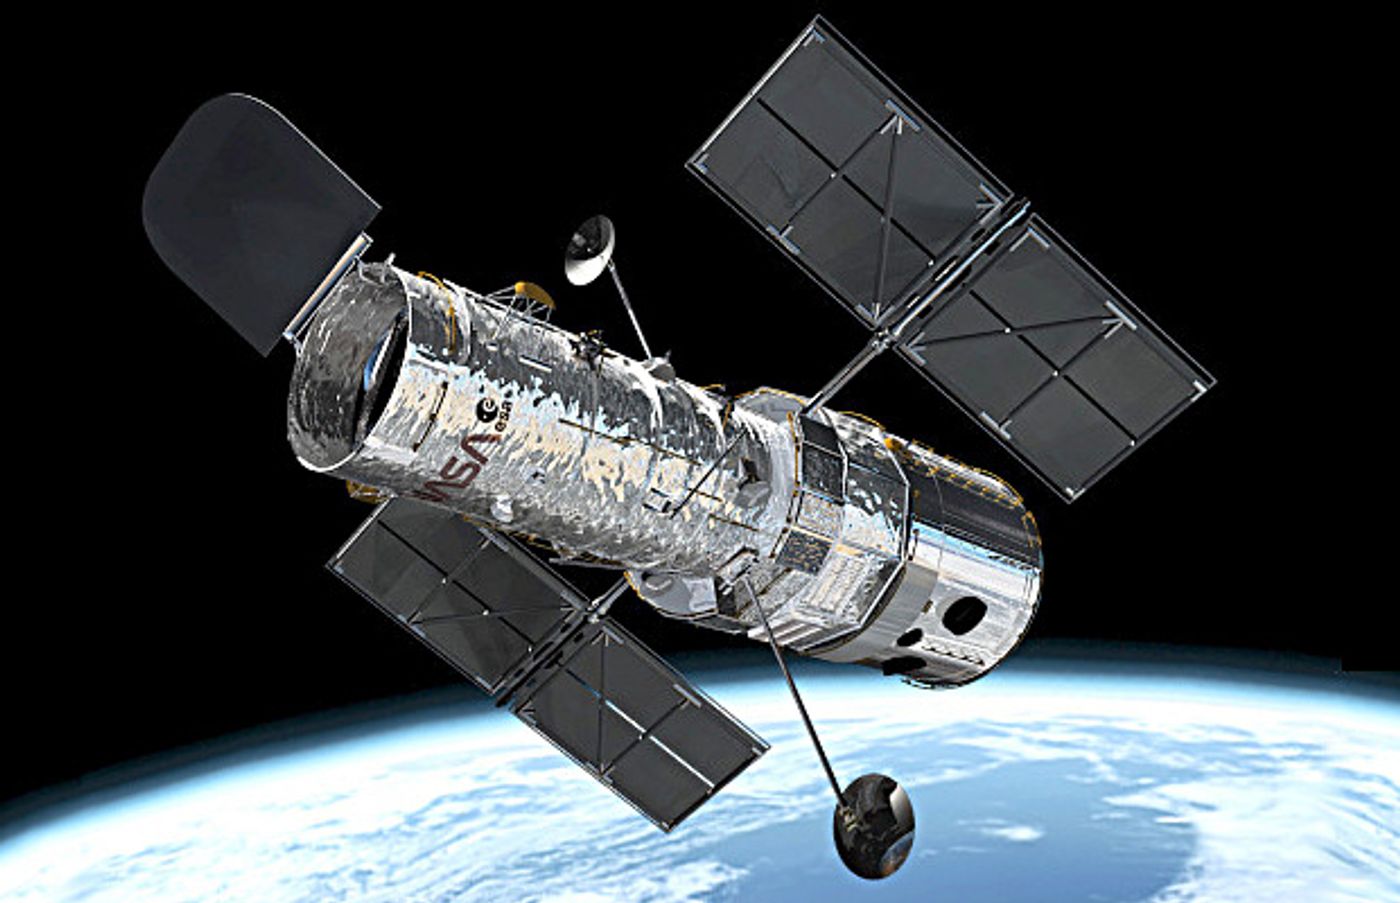 NASA's Hubble Space Telescope has a lot of successors coming up in the future.